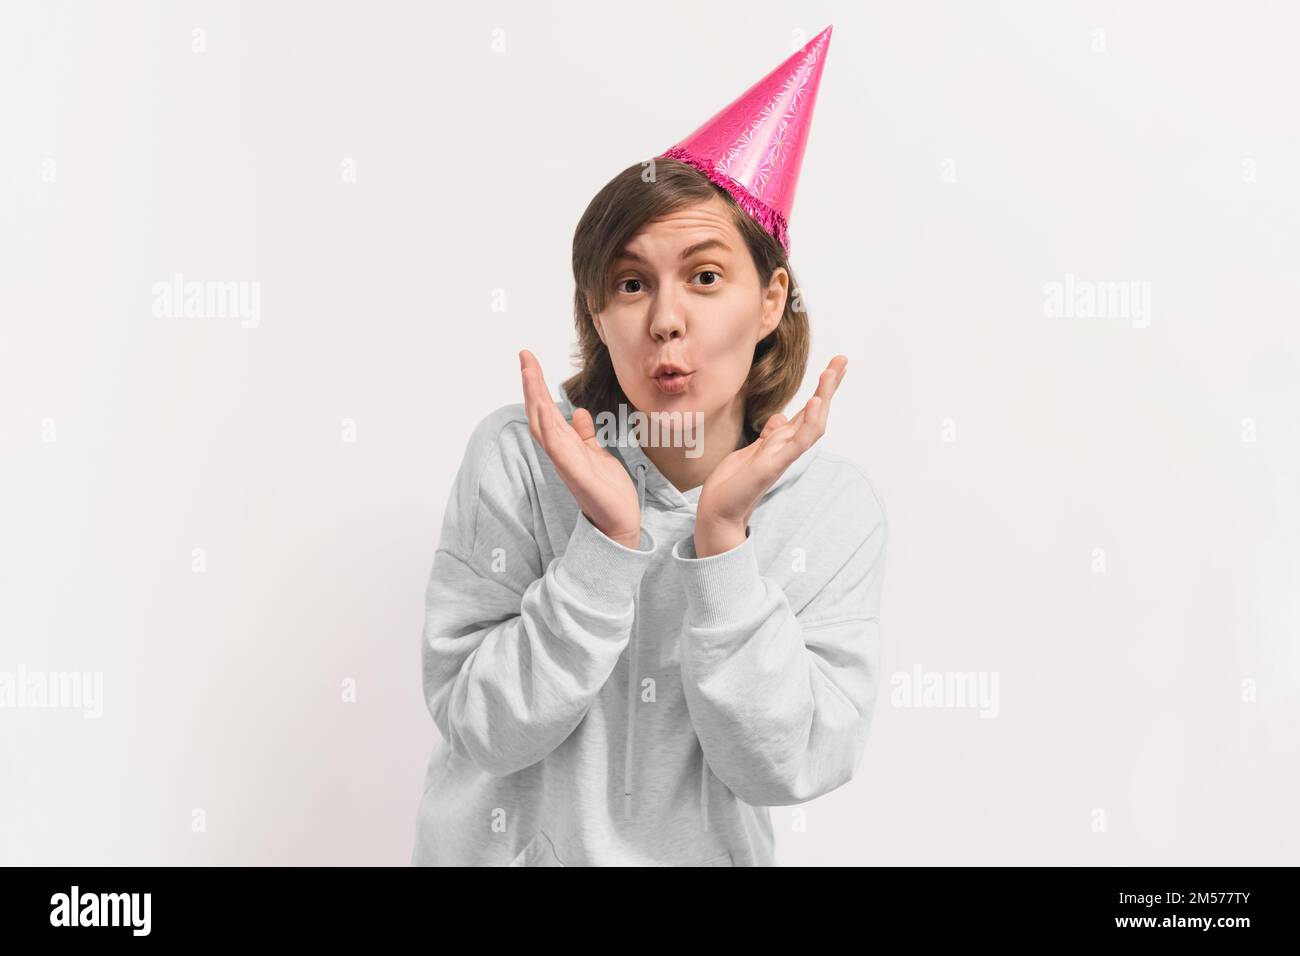 Young surprised woman in pink birthday hat isolated on white background.  Excited girl in hoodie holding her hands near face. Lifestyle concept Stock Photo